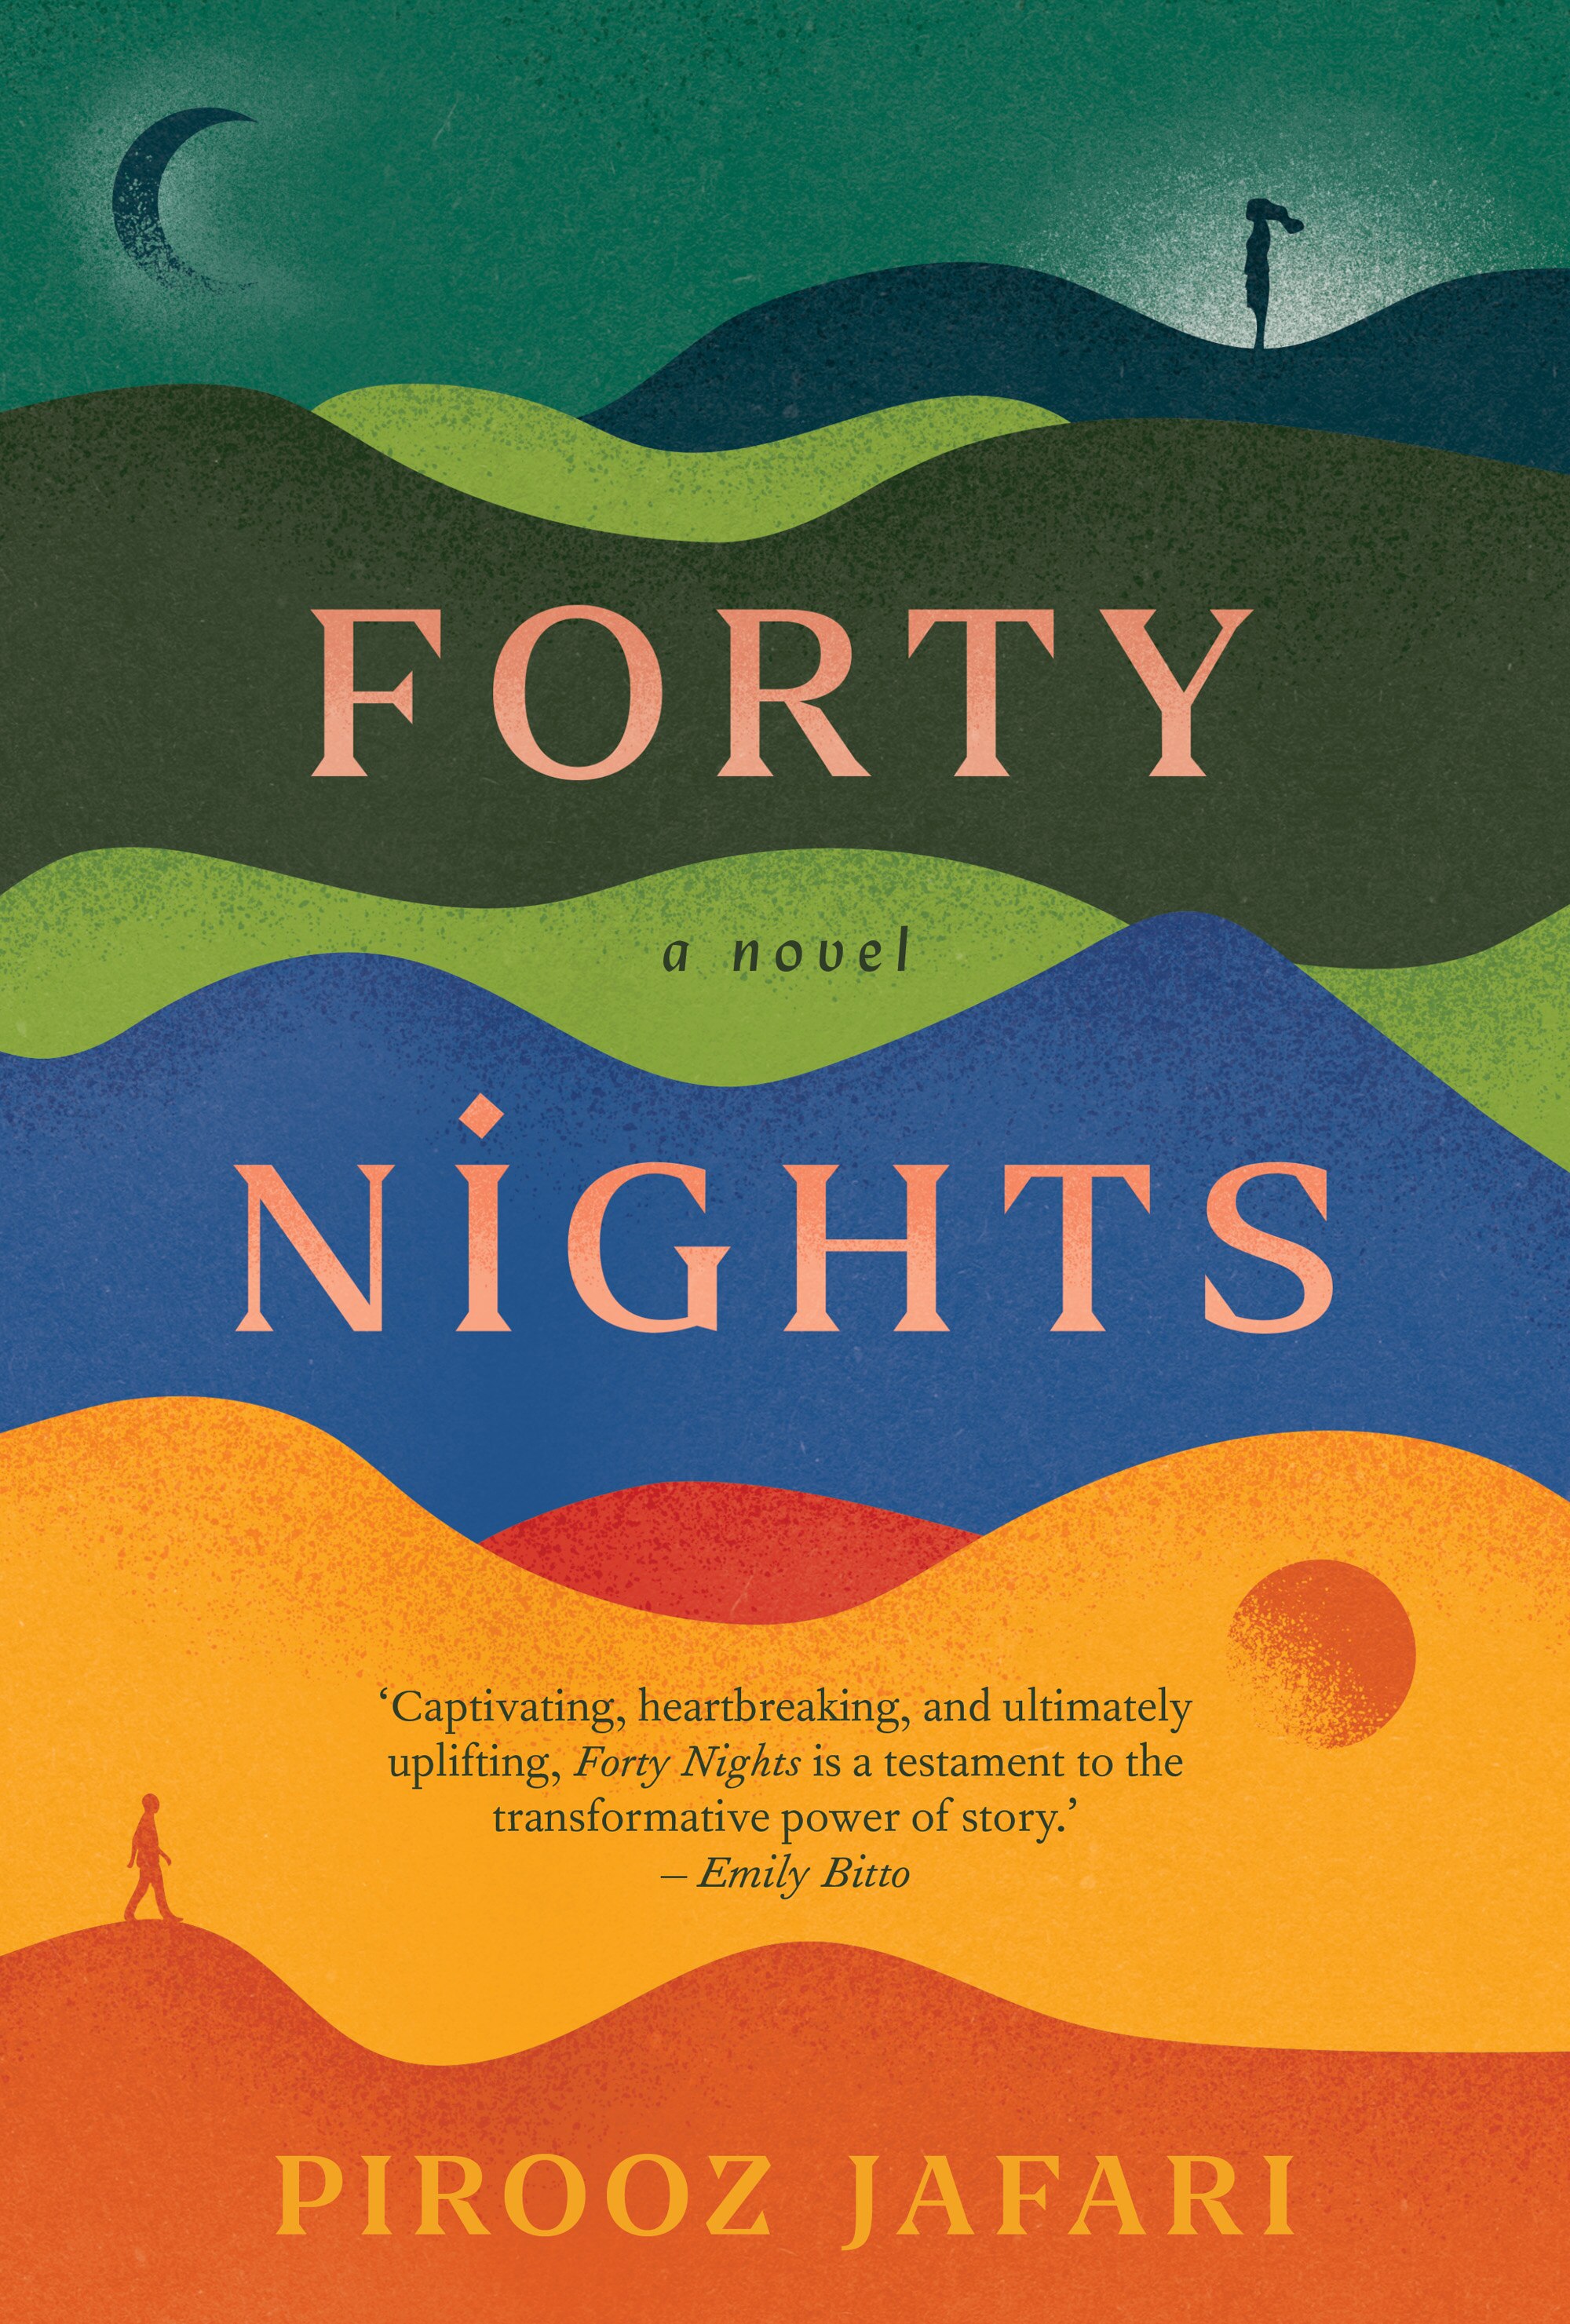 Cover of Forty Nights by Pirooz Jafari